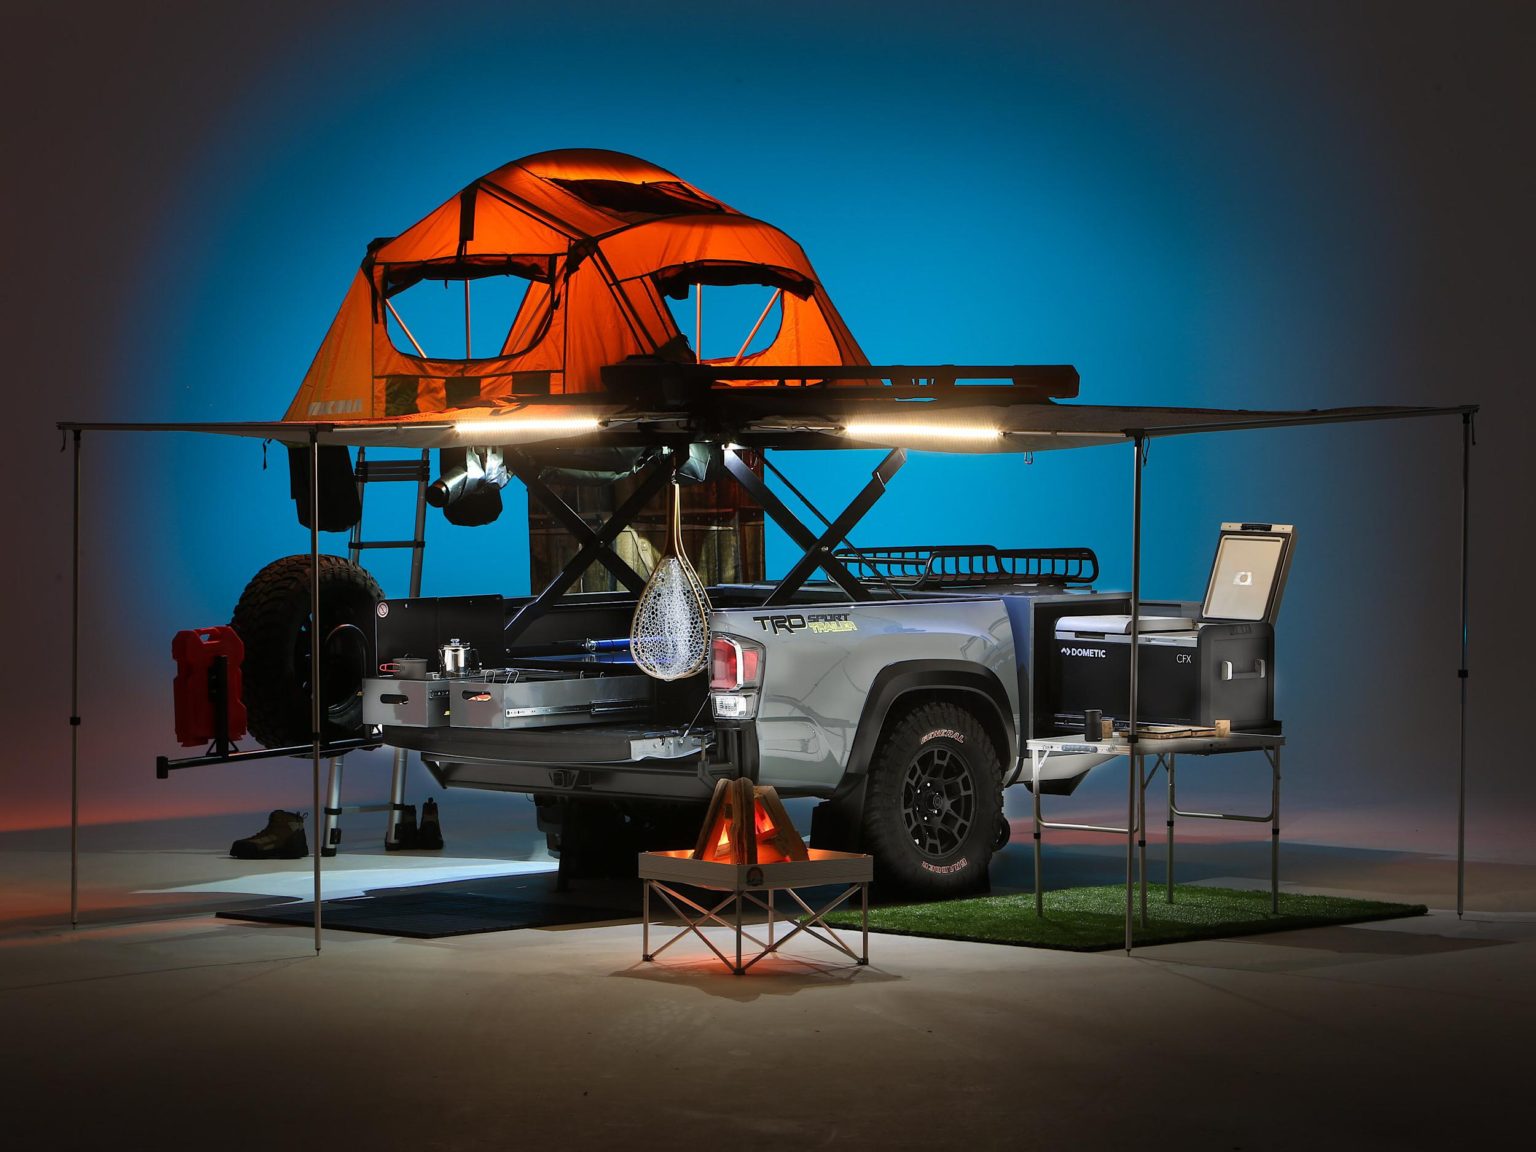 The Toyota TRD Sport Trailer is a extreme base camp trailer for overlanding enthusiasts.